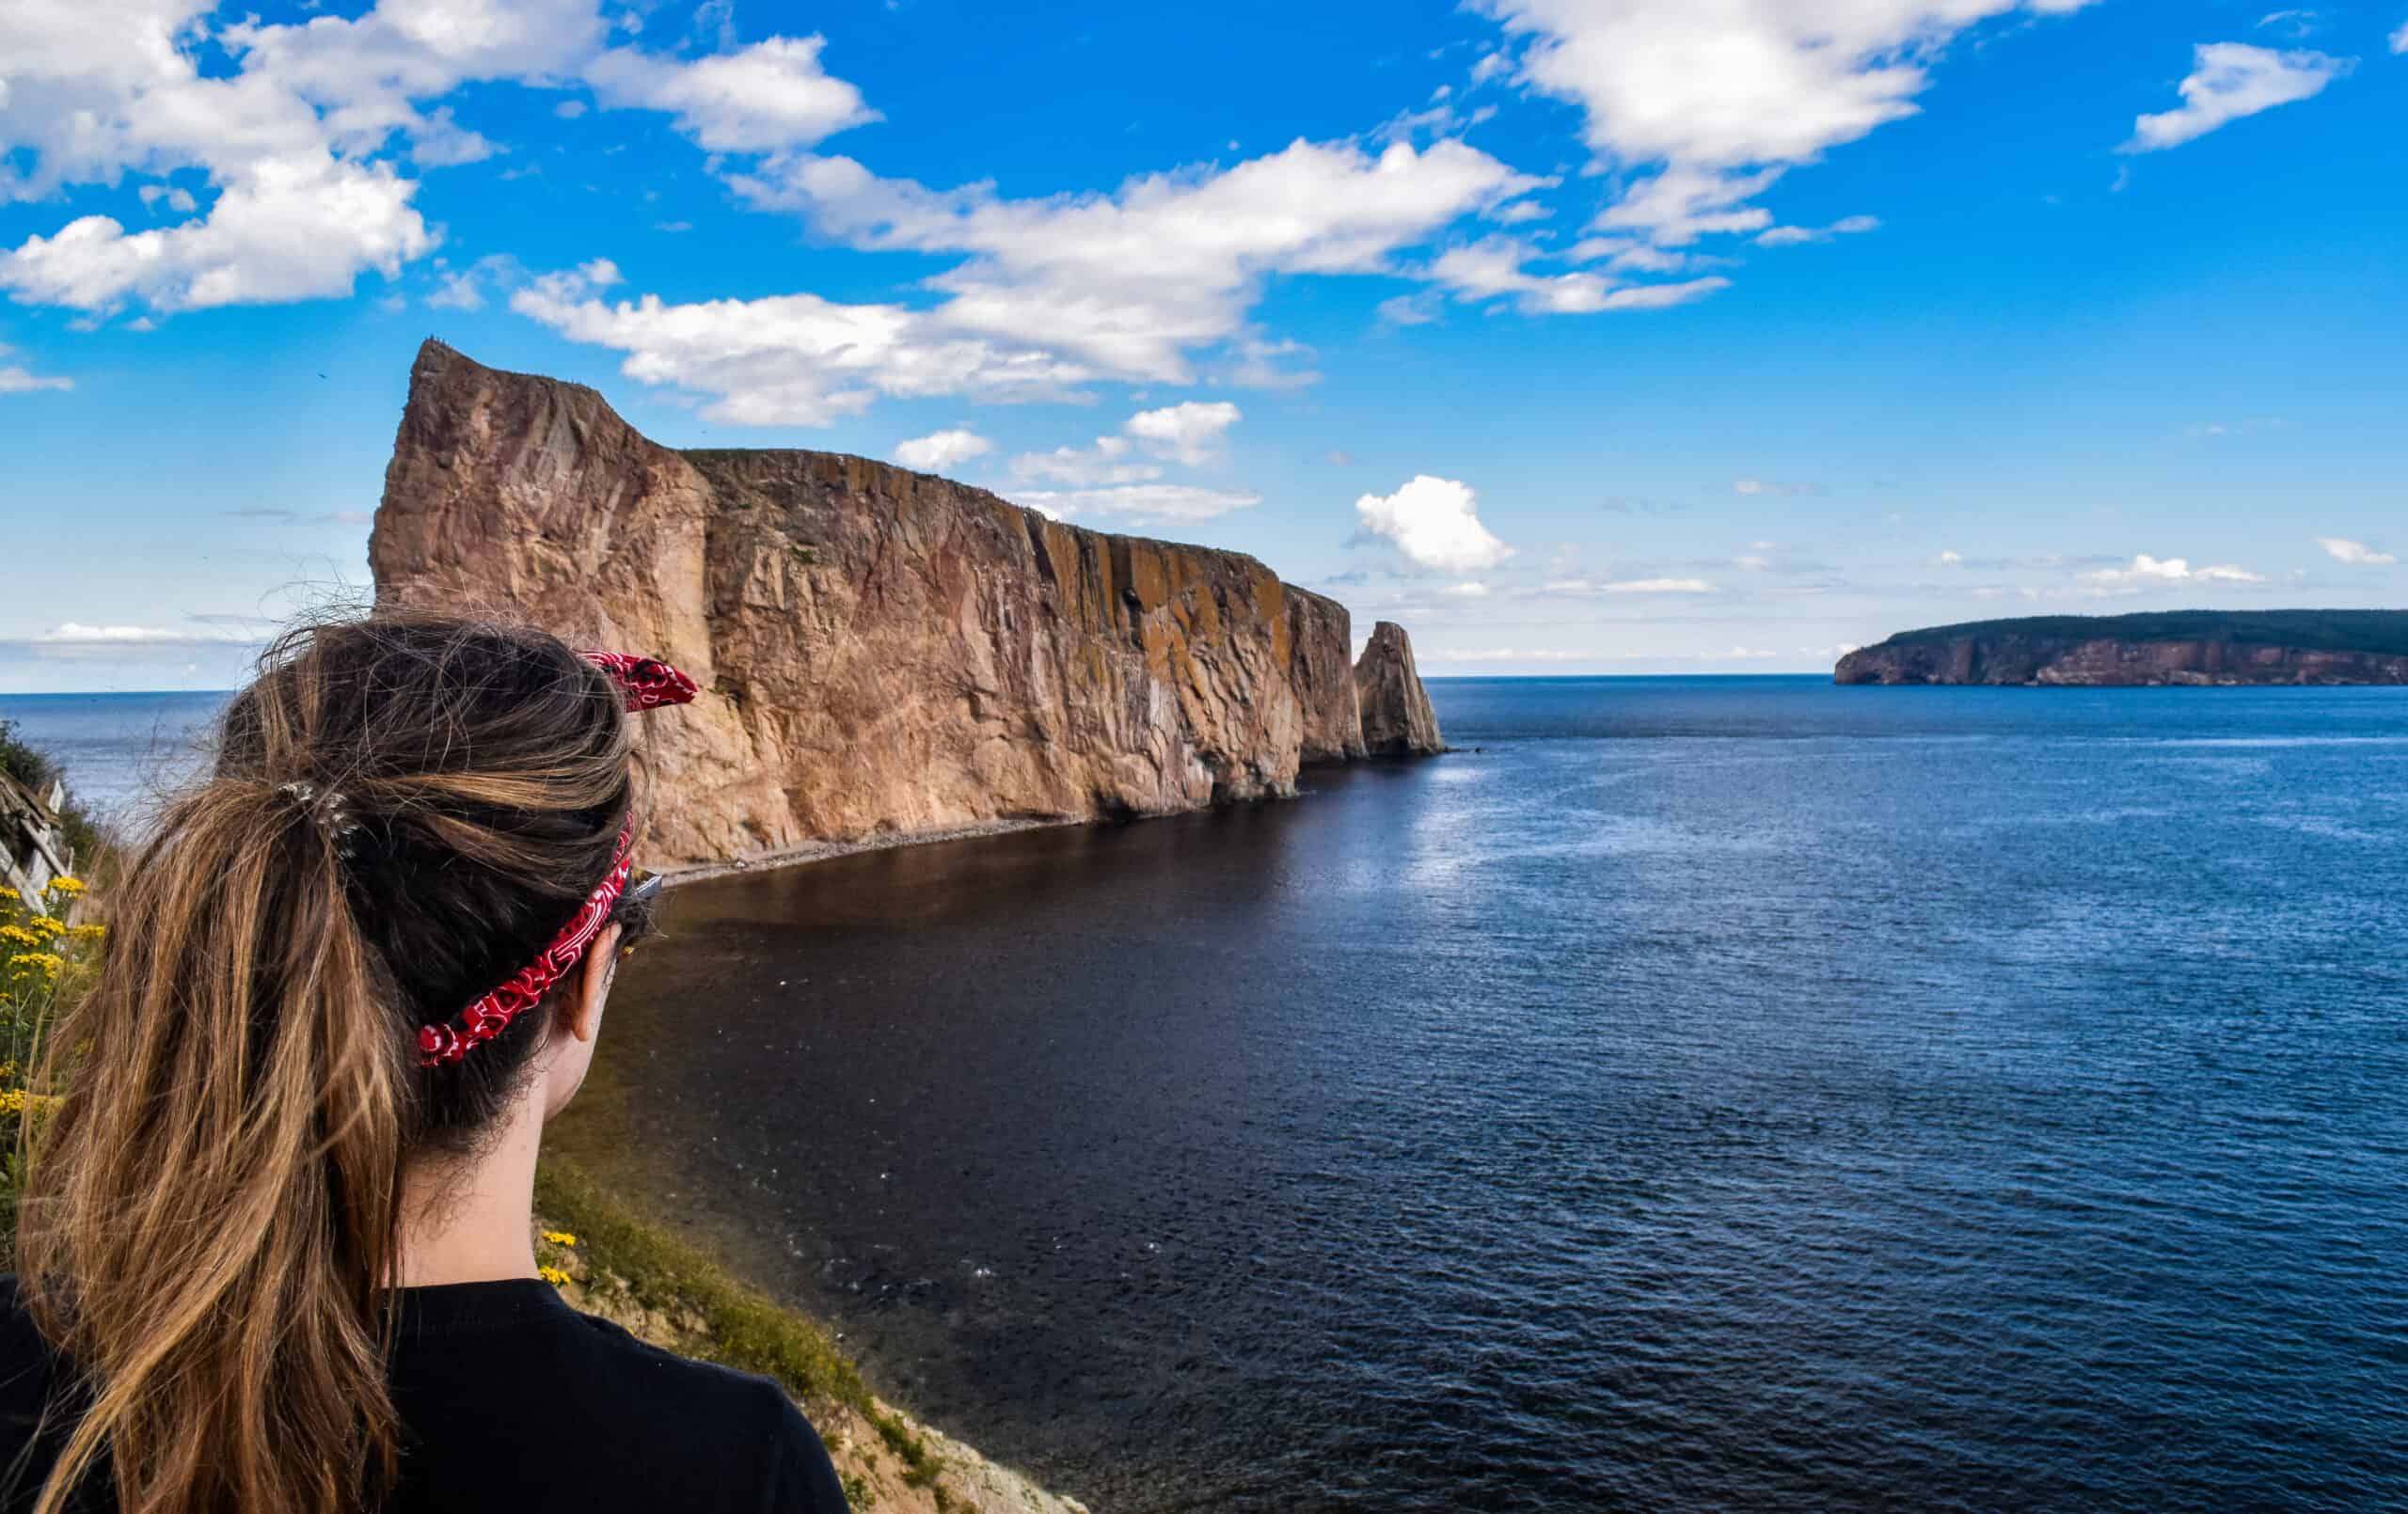 percé rock with person